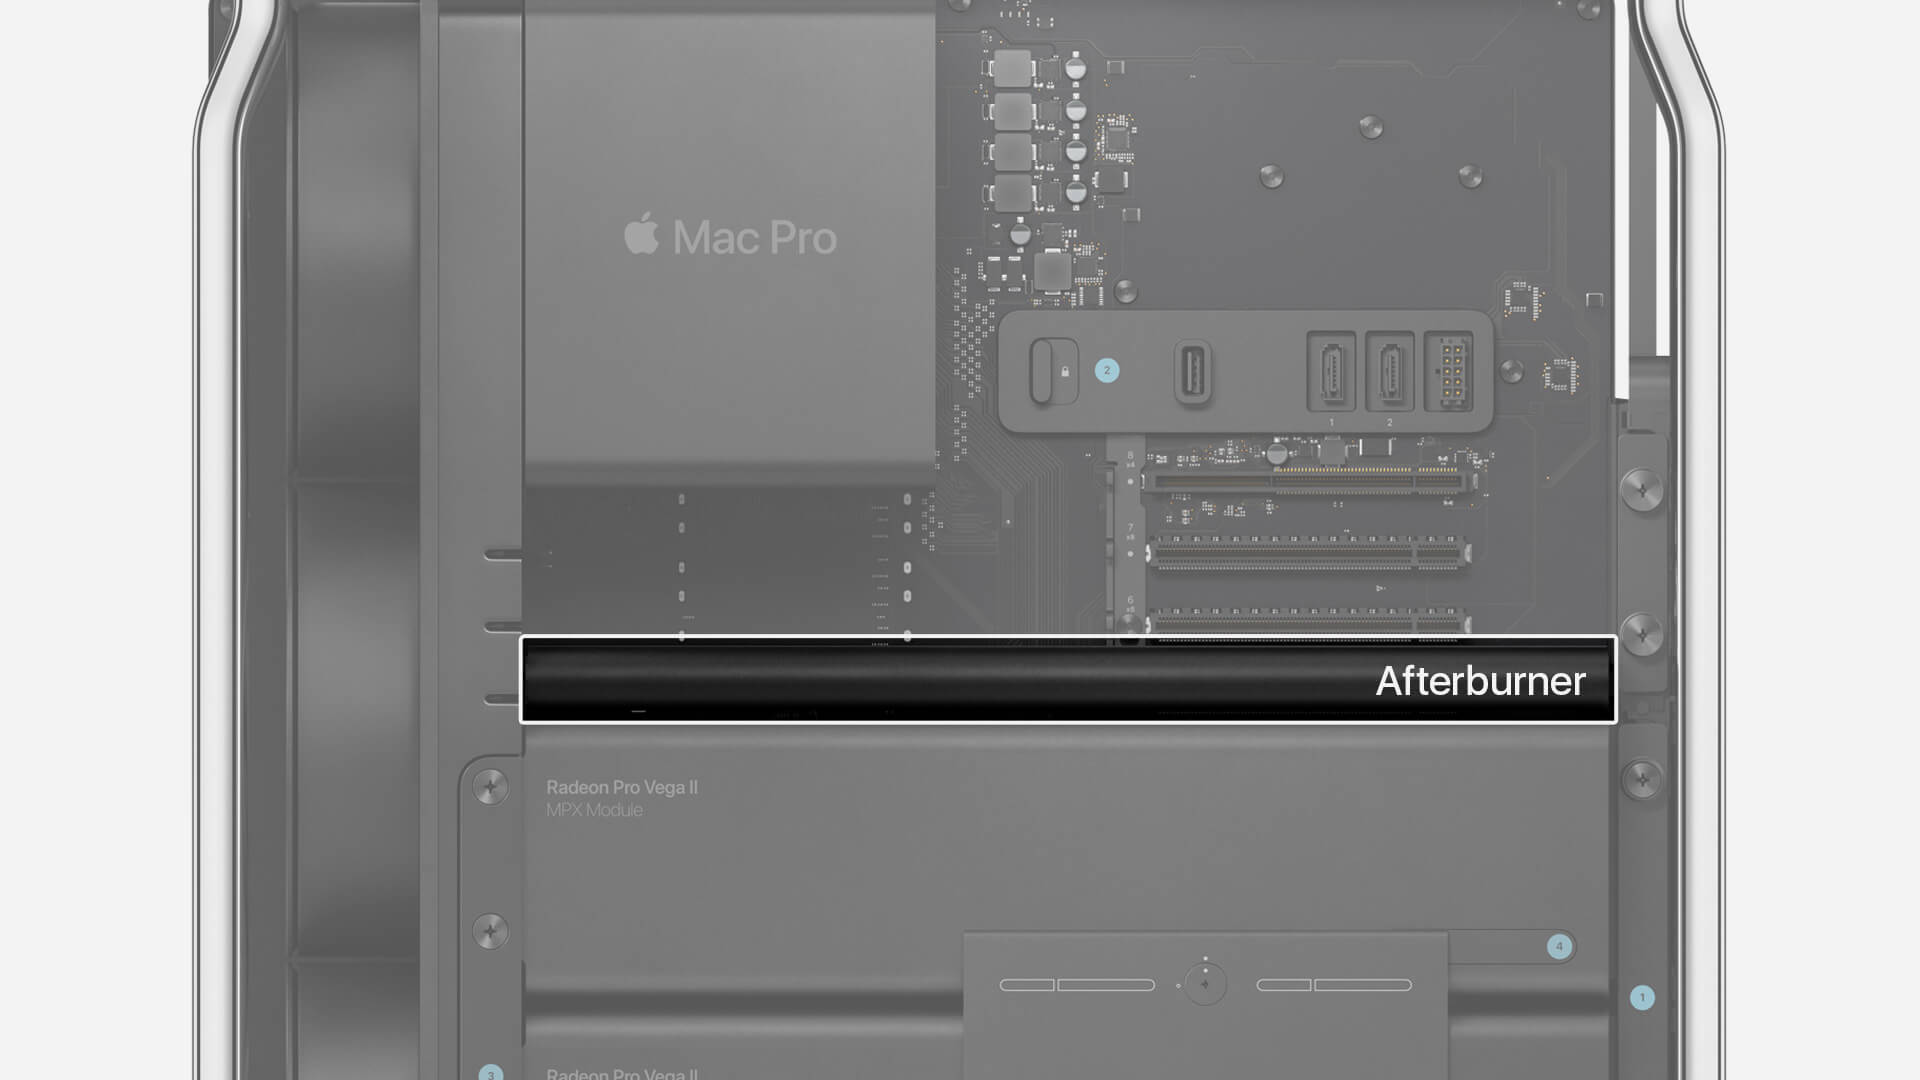 What is mac pro afterburner accelerator card